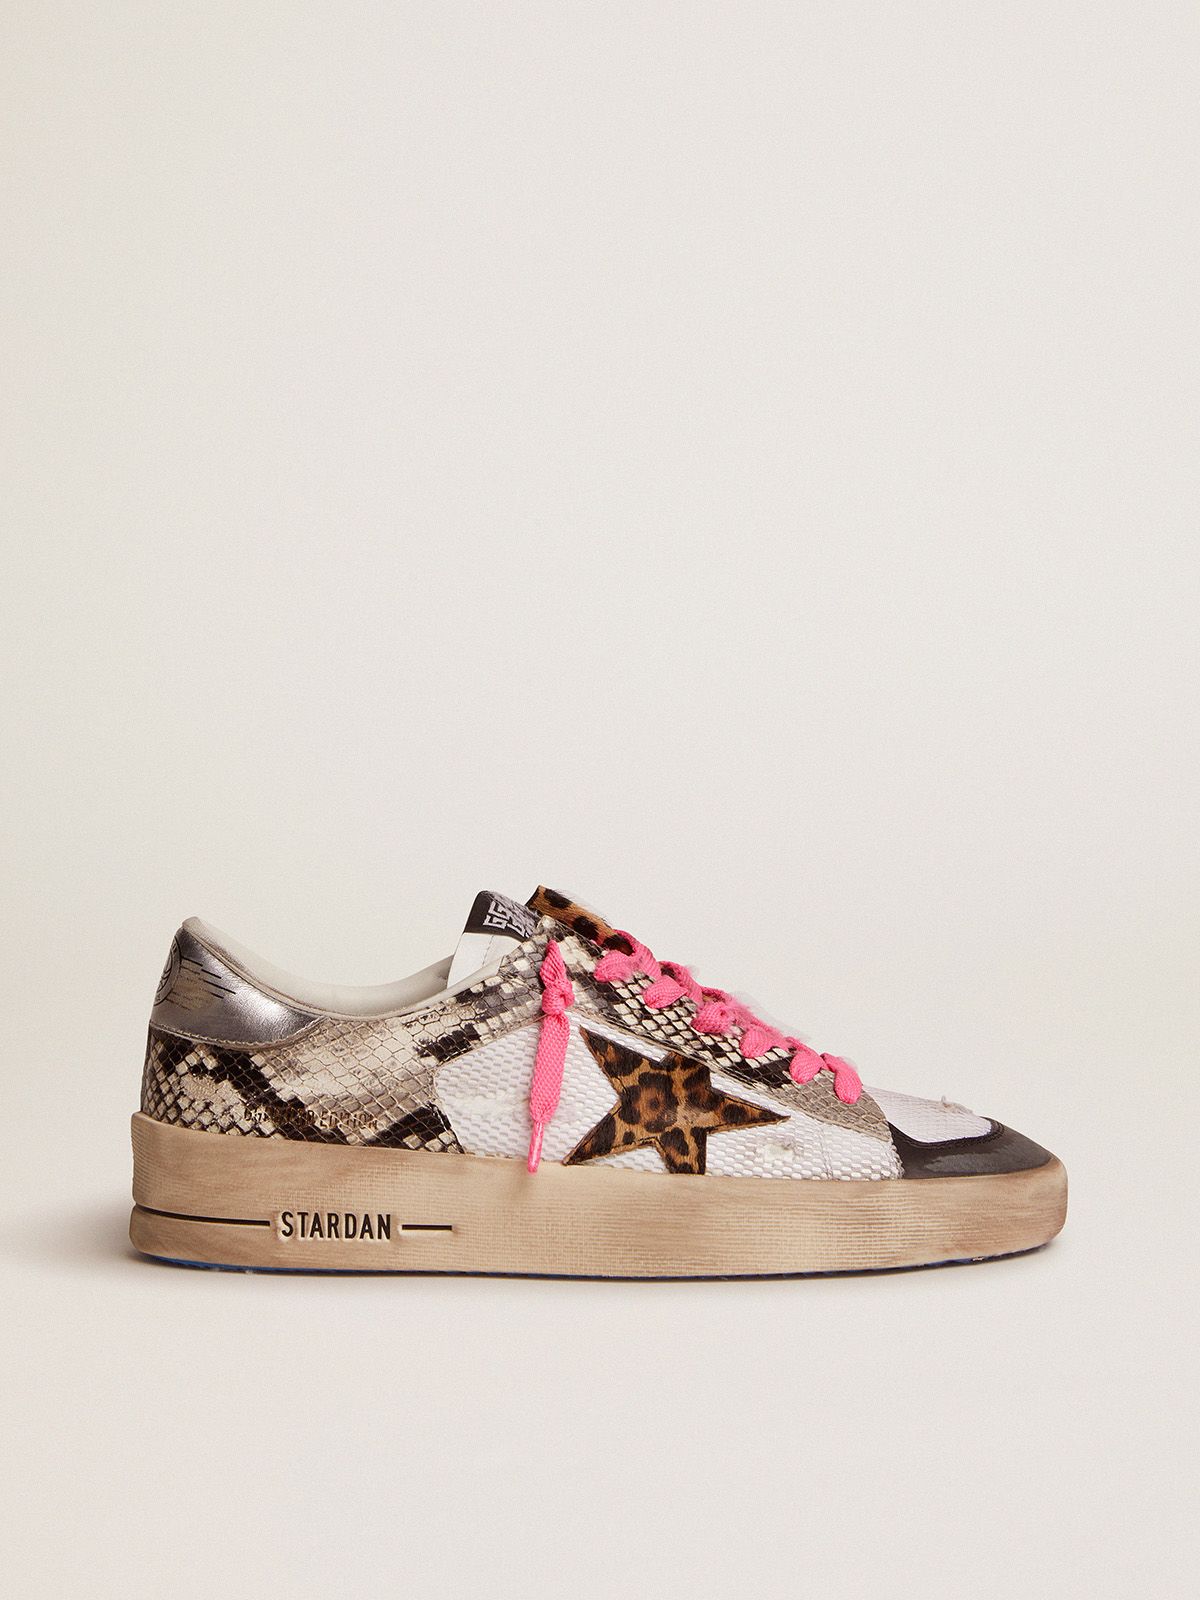 golden goose skin leather with upper pony and LAB leopard-print Stardan star snake-print sneakers